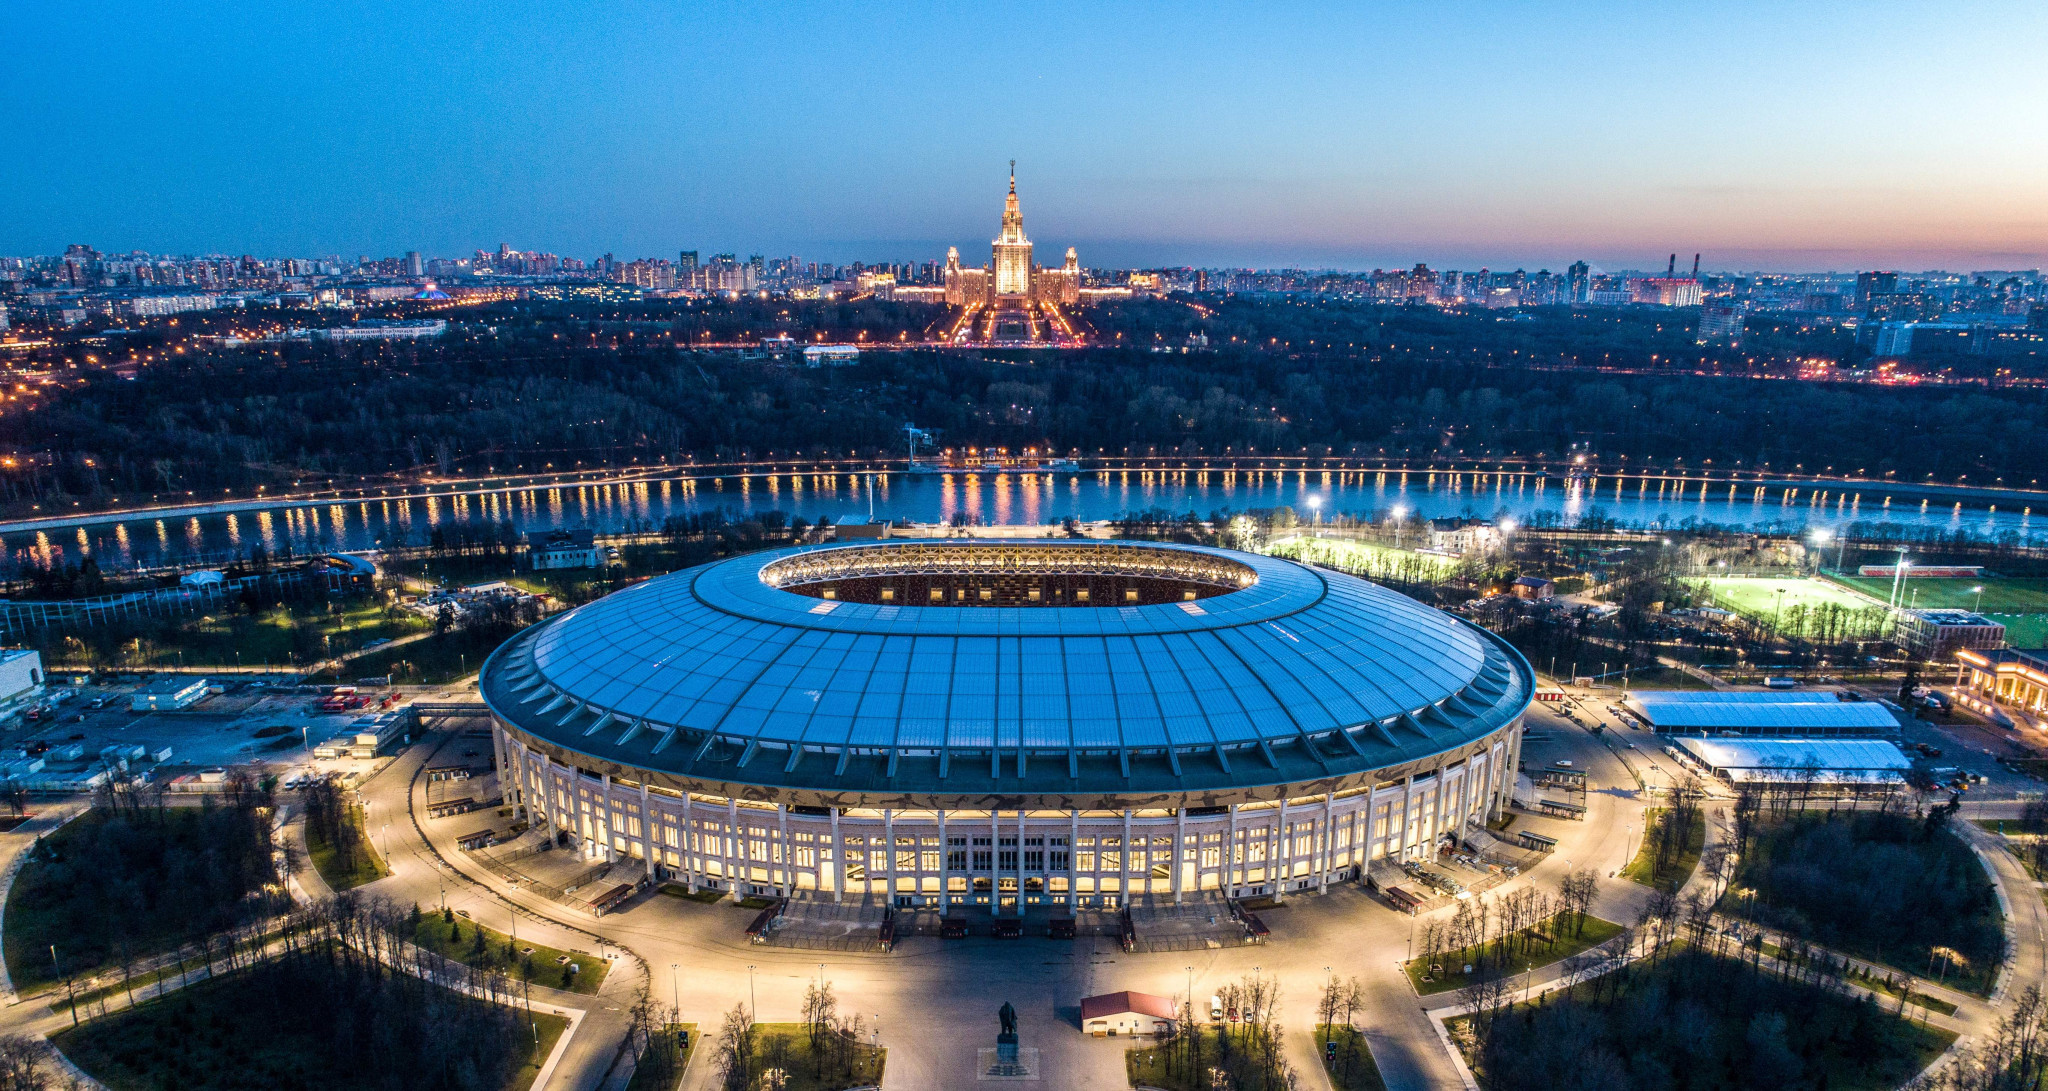 Next month's Sambo World Cup in Moscow is due to be held at a venue within the Luzhniki Stadium complex ©Getty Images